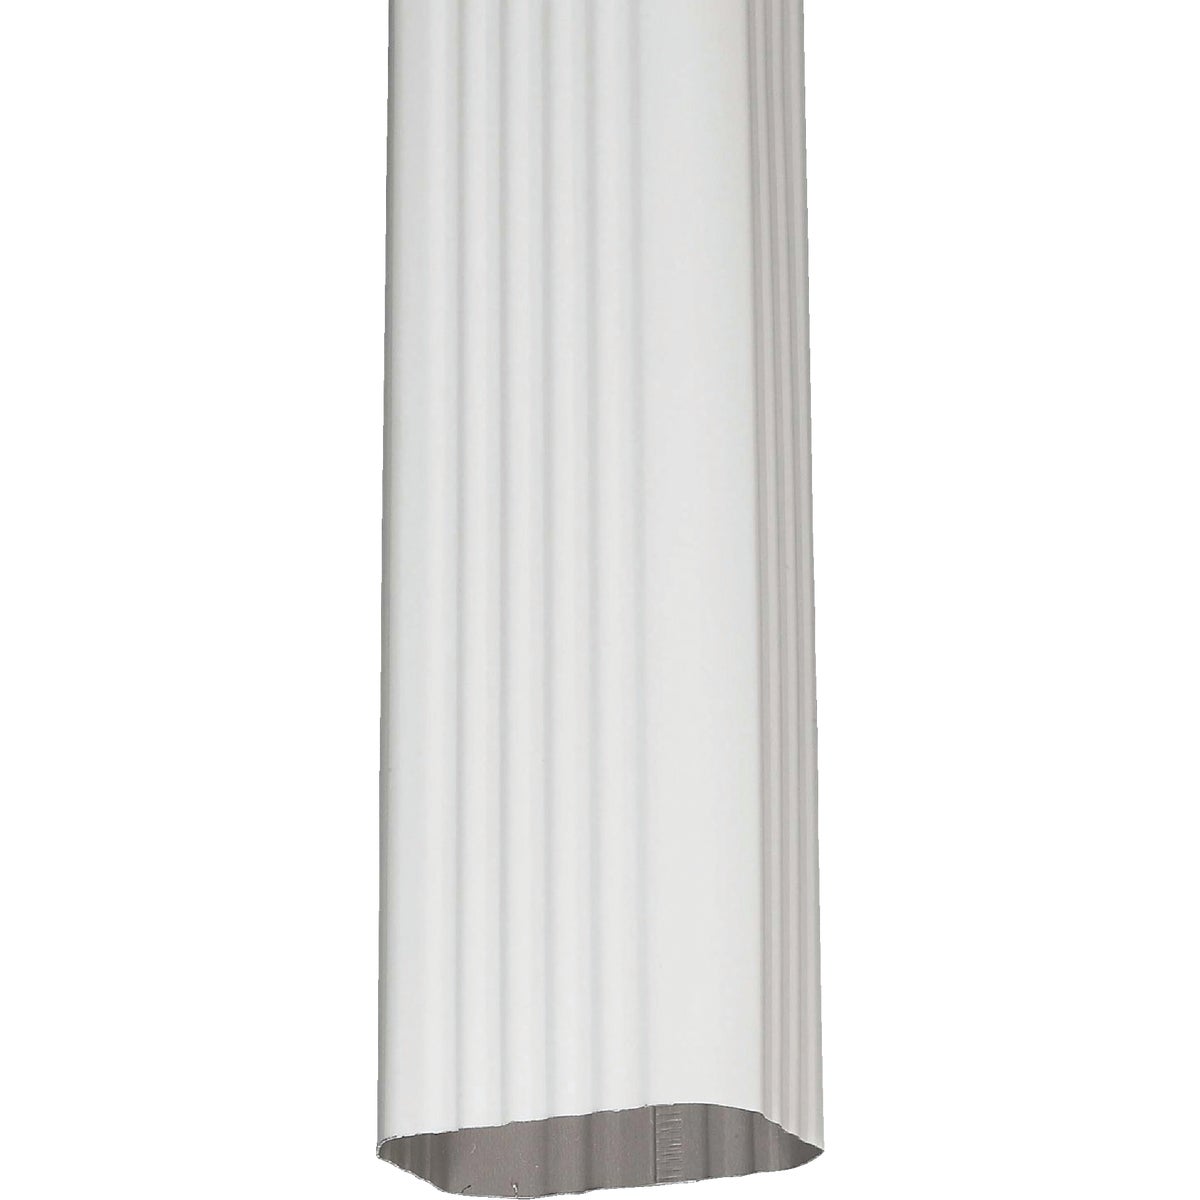 Spectra Metals 3 In. x 4 In. White Aluminum Downspout